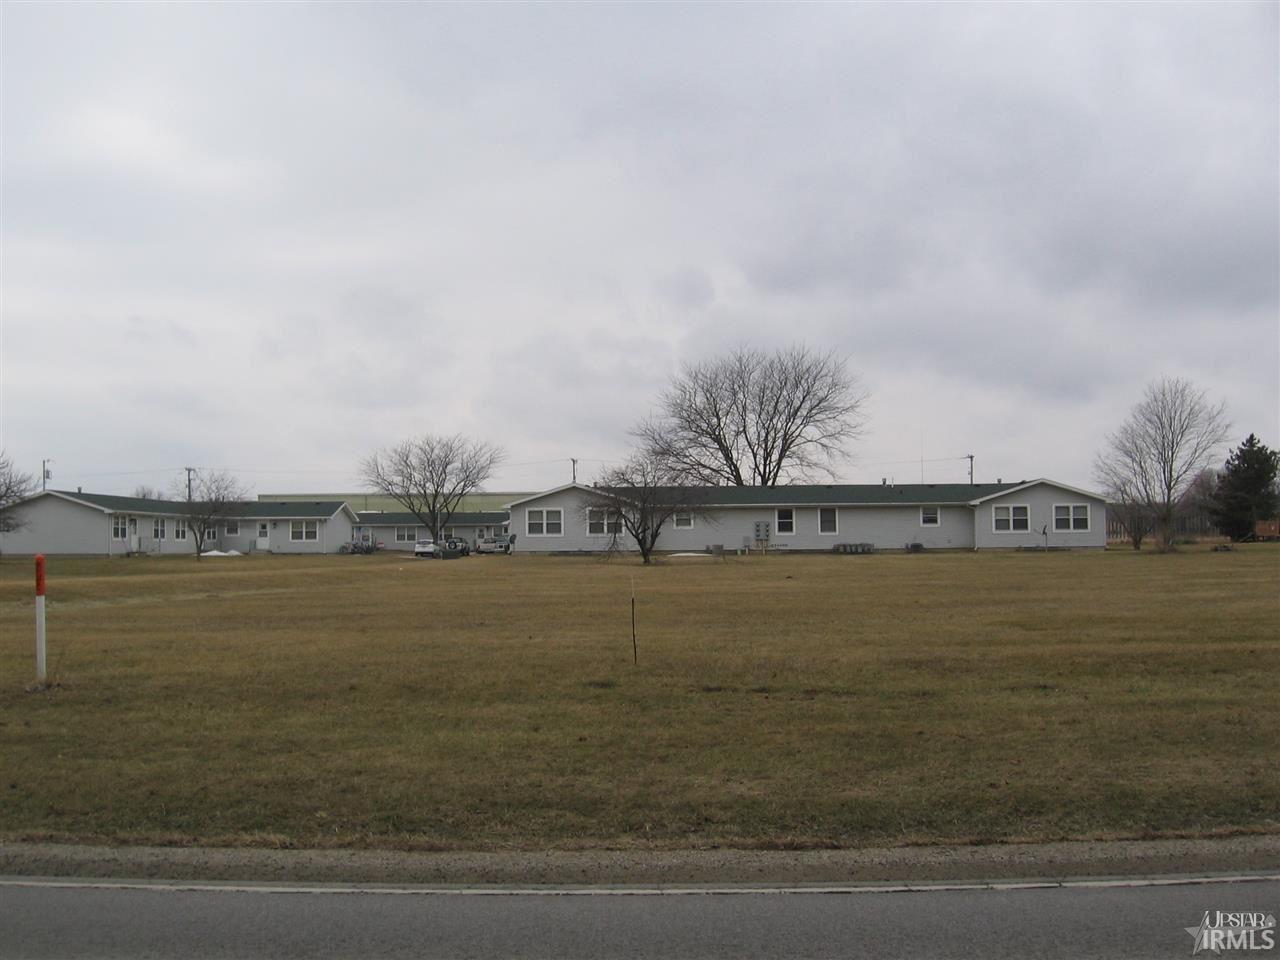 Located on N. State Street (ST RD 5) at the north edge of South Whitley. This 1.258 acre lot zoned general business offers excellent visibility and exposure that would be perfect for a multitude of commercial uses and multi family residential, restaurant, office and many more opportunities are available for this prime location in South Whitley. Listing Broker is a member of Seller's LLC.